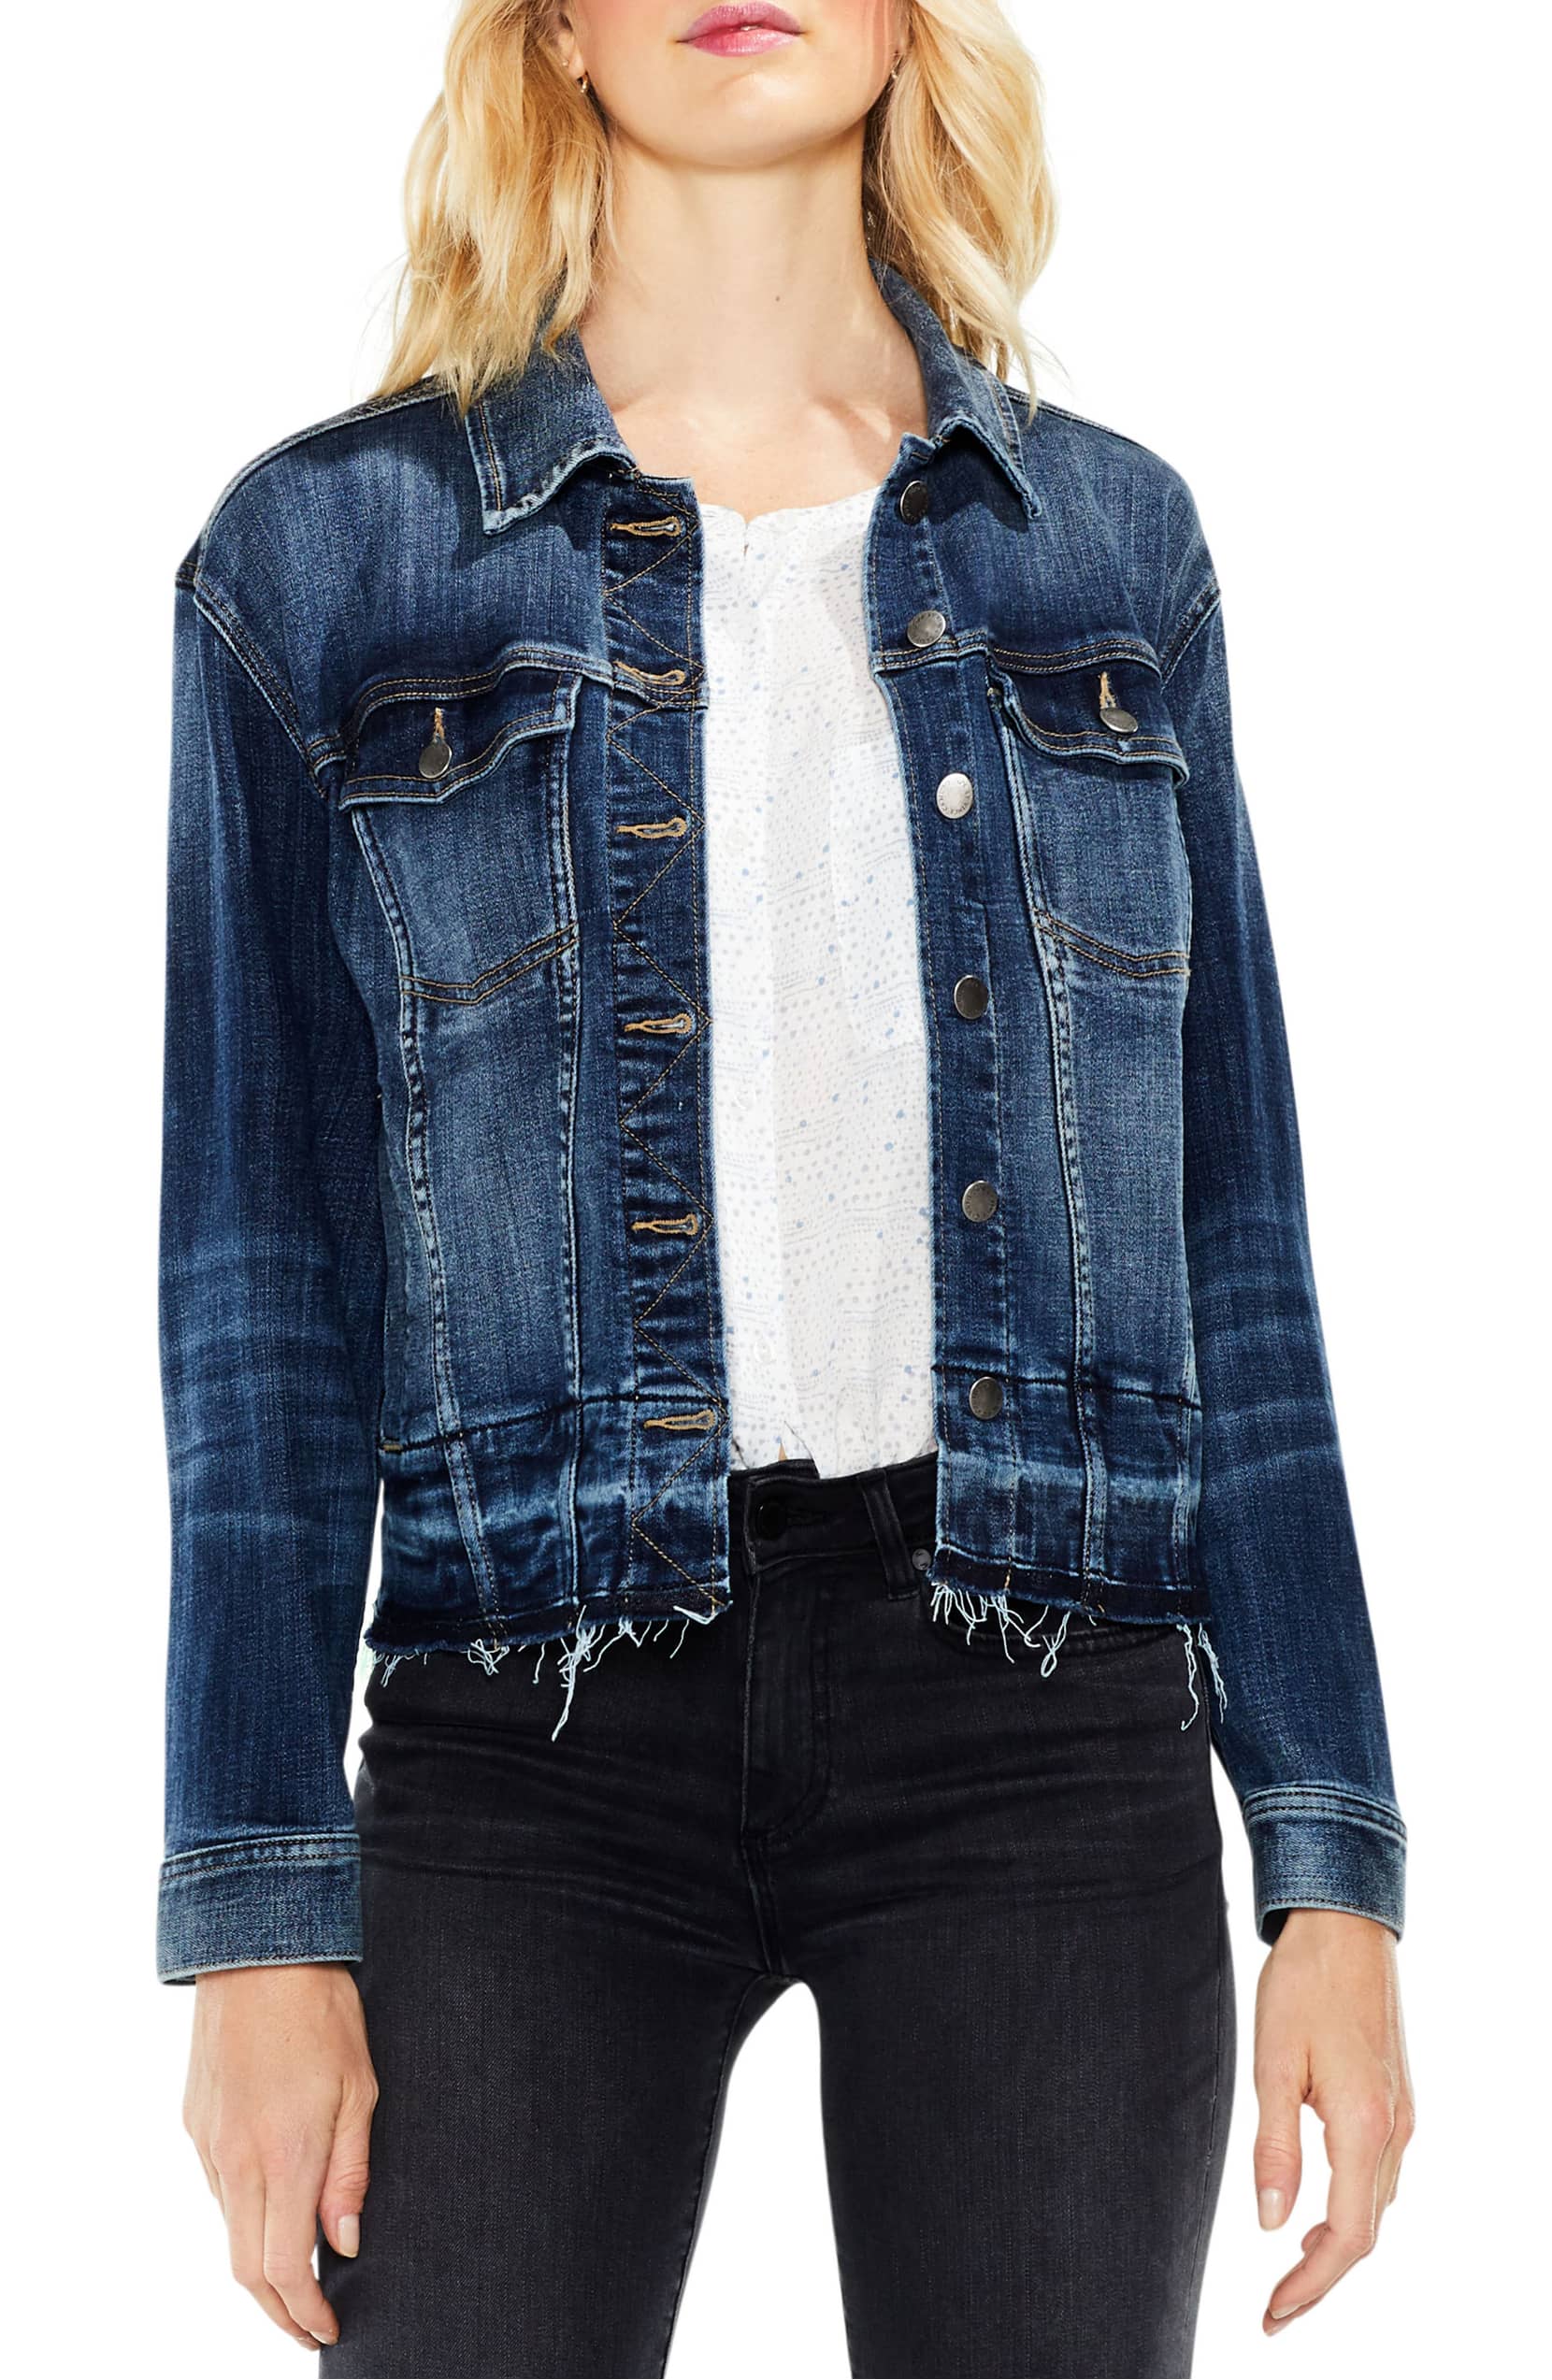 We're Loving This Fringed Denim Jacket on Sale For Under $80 - My Style ...